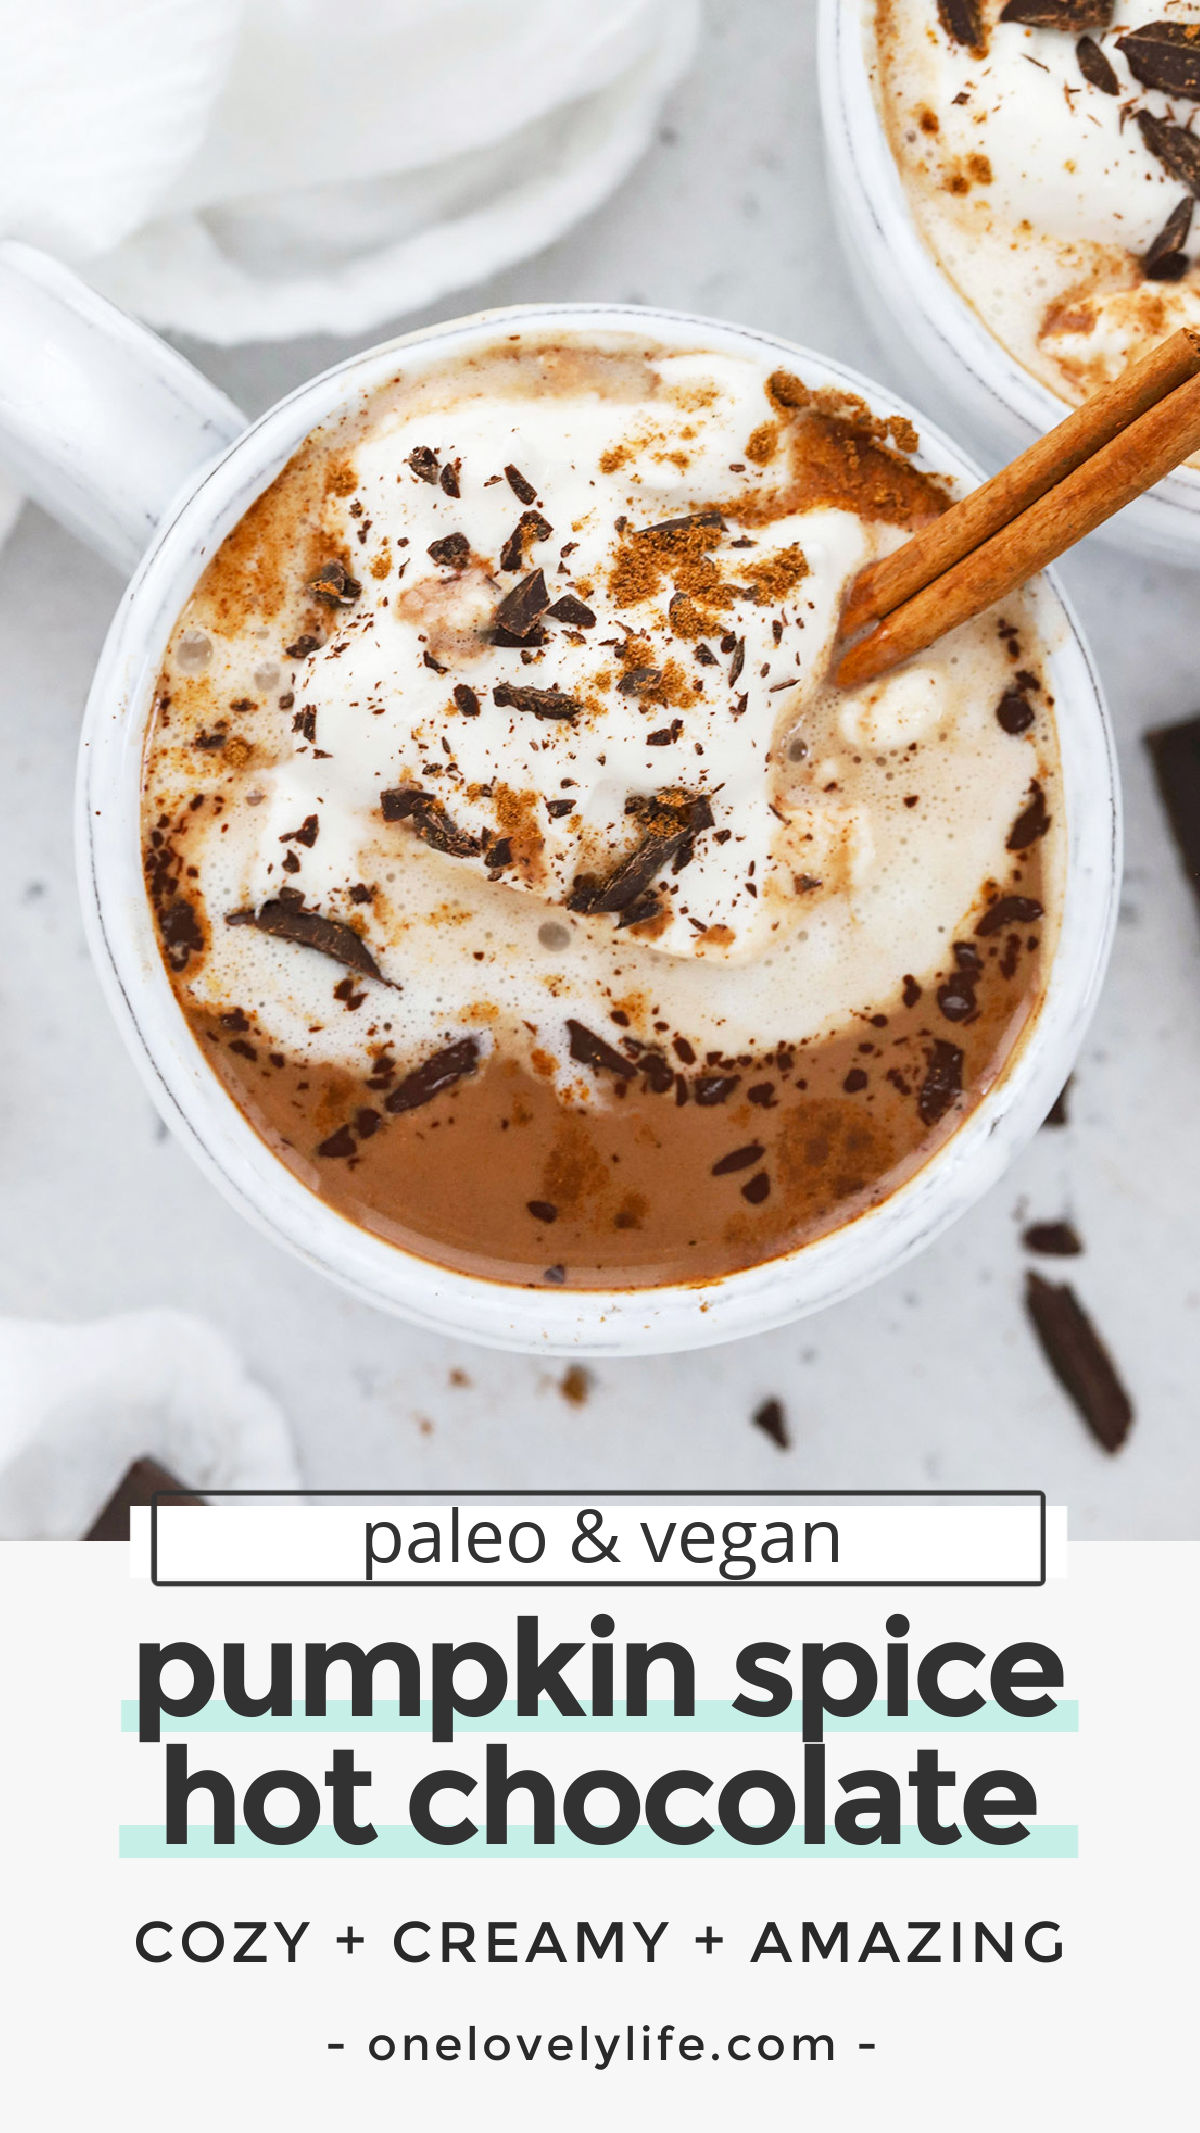 Vegan Pumpkin Spice Hot Chocolate - This dairy-free pumpkin spice hot chocolate is the perfect drink to cozy up with during cold weather. You'll love the rich, chocolatey flavor and warm kiss of spice. (Paleo-Friendly) // Pumpkin Spice Hot Cocoa Recipe // Vegan Hot Chocolate Recipe // Dairy Free Hot Chocolate Recipe // Pumpkin Hot Chocolate // Cinnamon Hot Chocolate